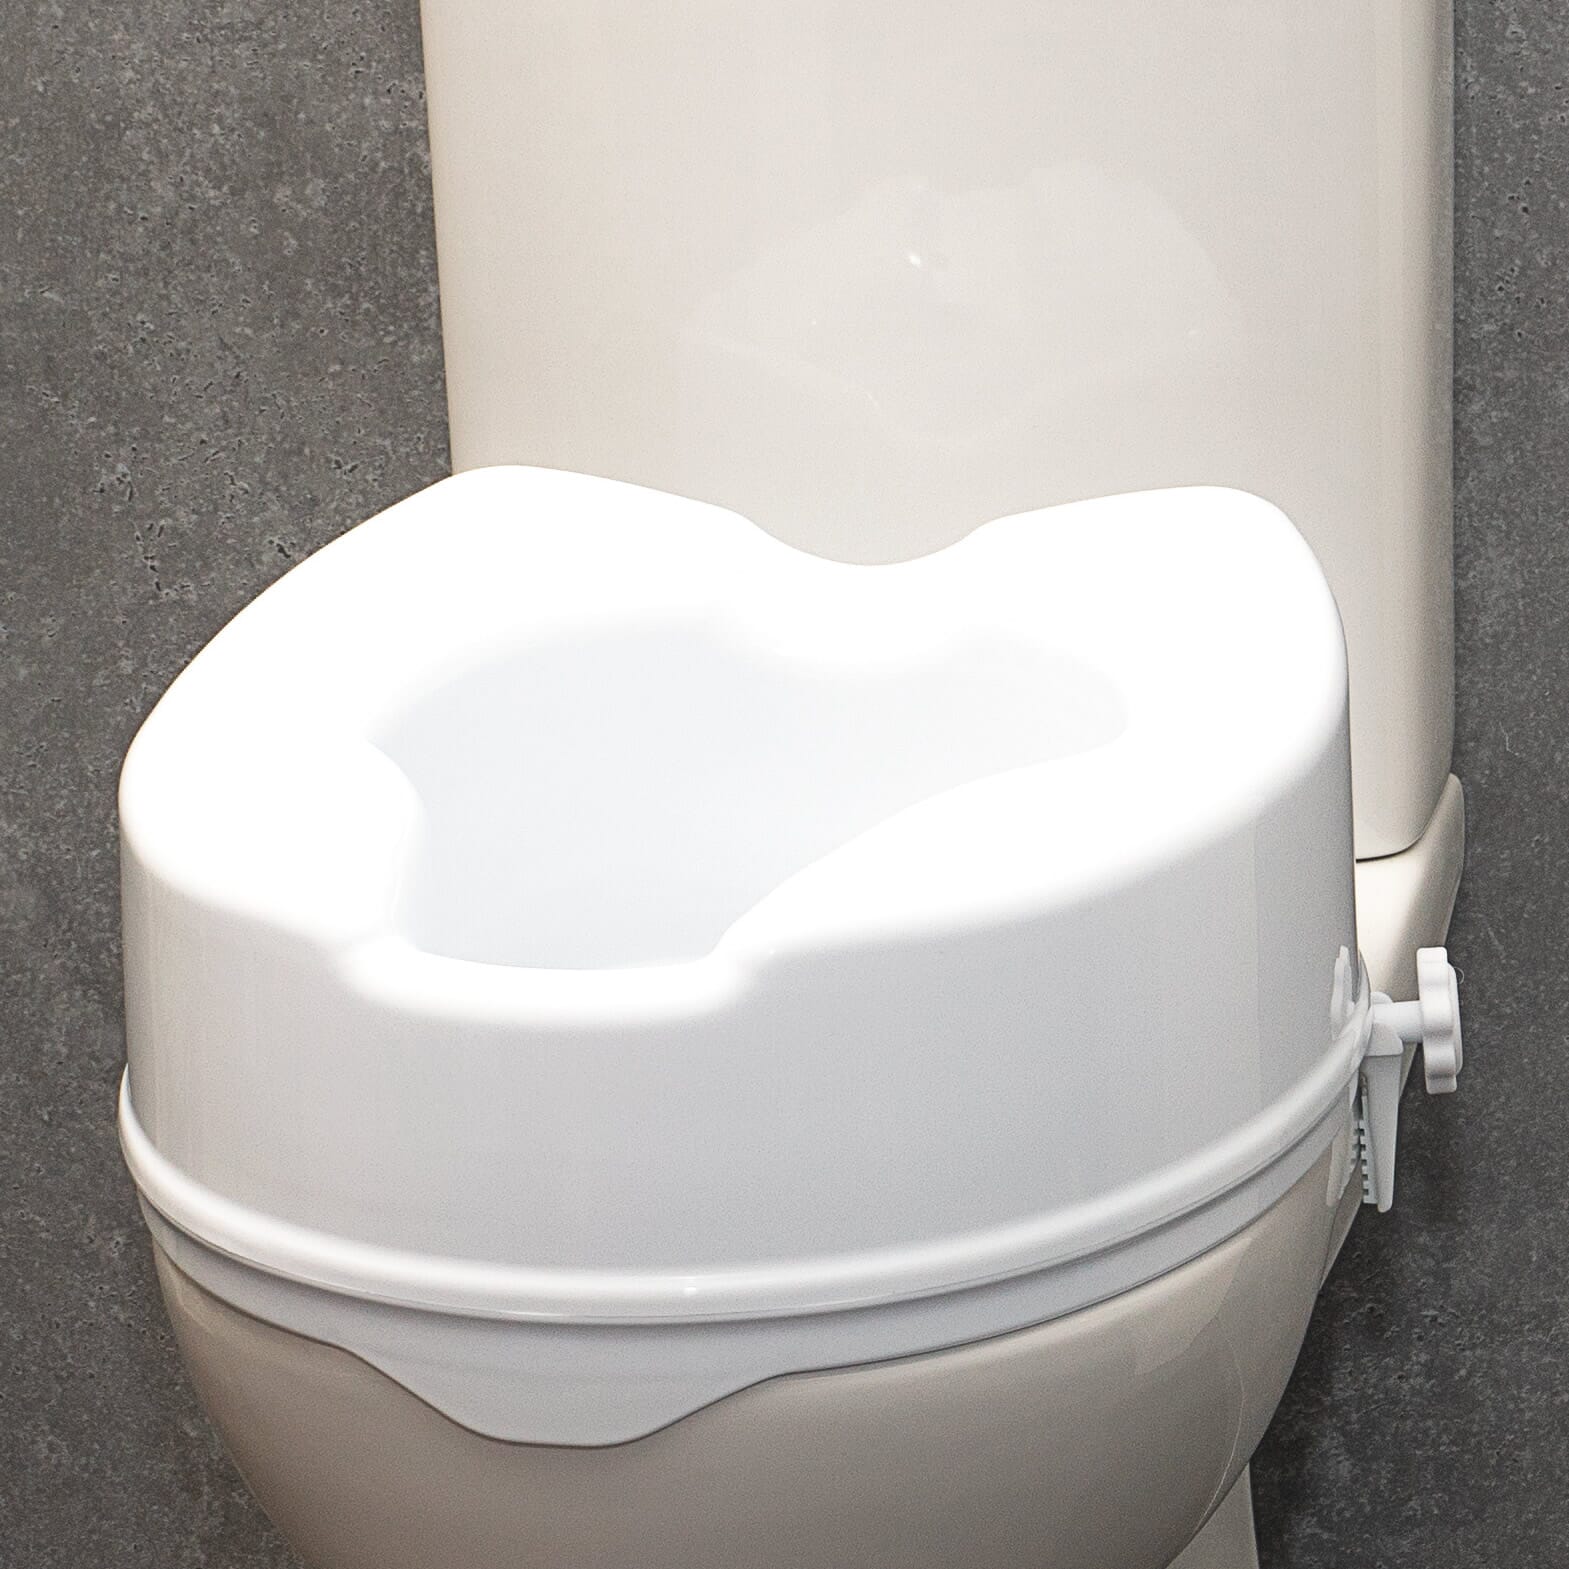 View Raised Toilet Seat 6 inch seat information